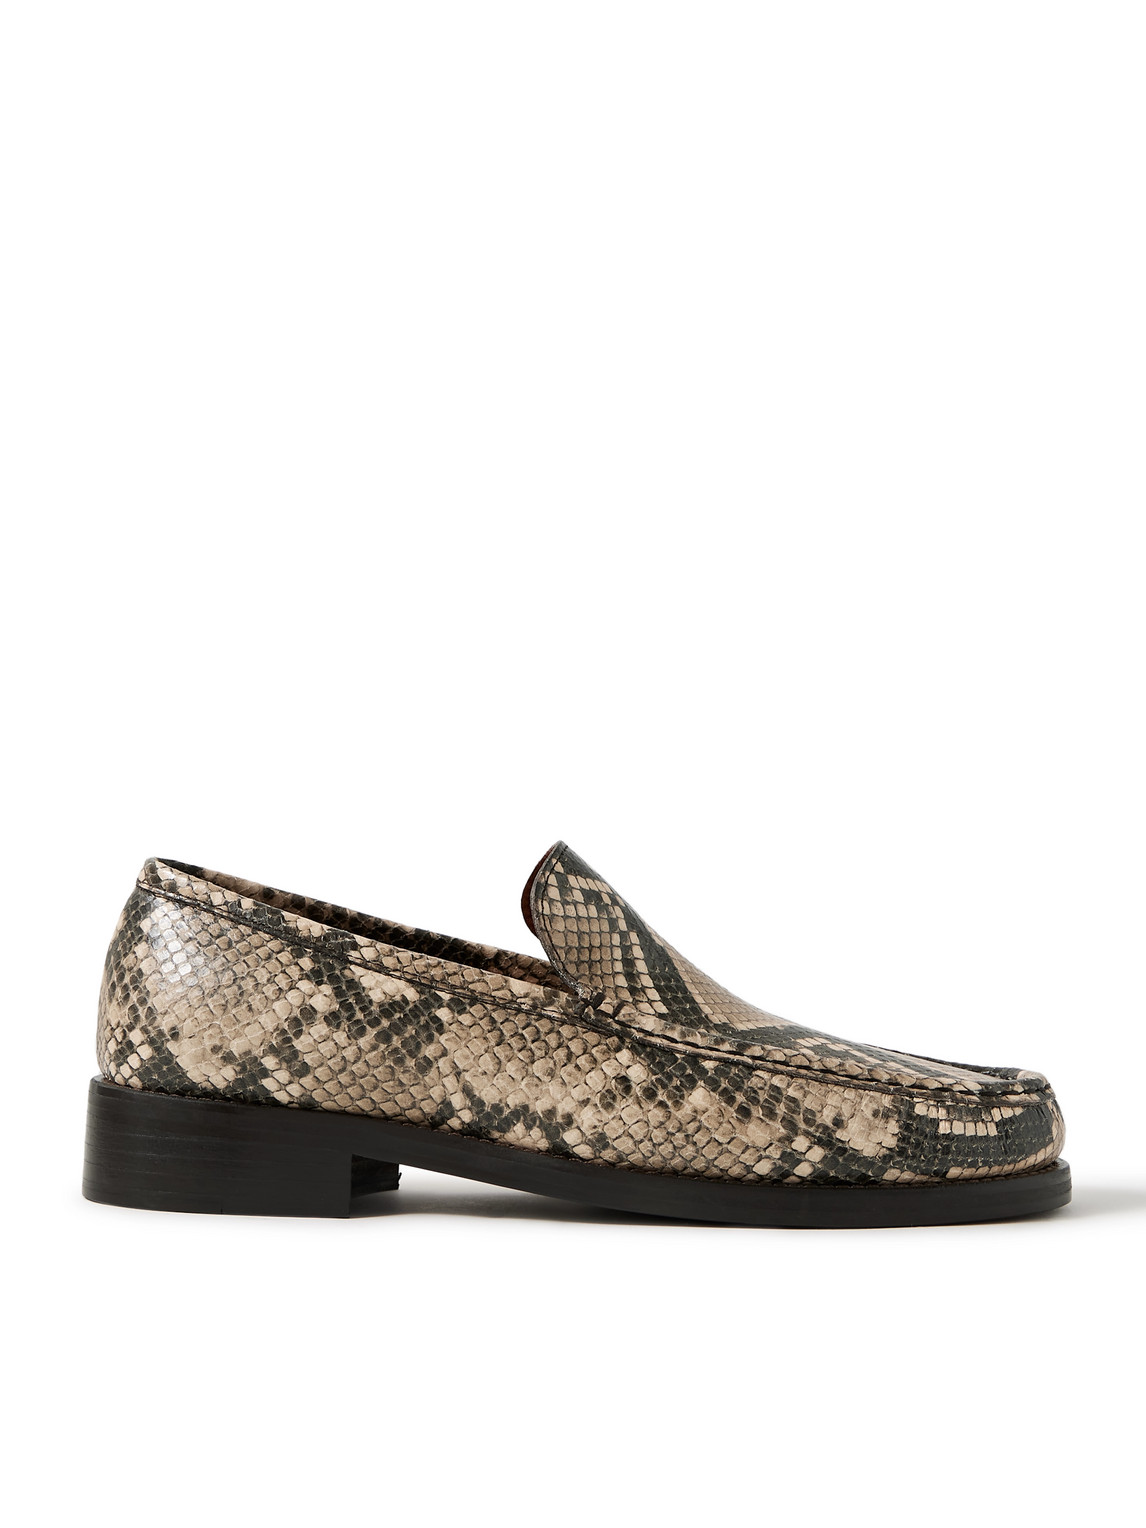 Acne Studios Boafer Snake-effect Leather Loafers In Brown